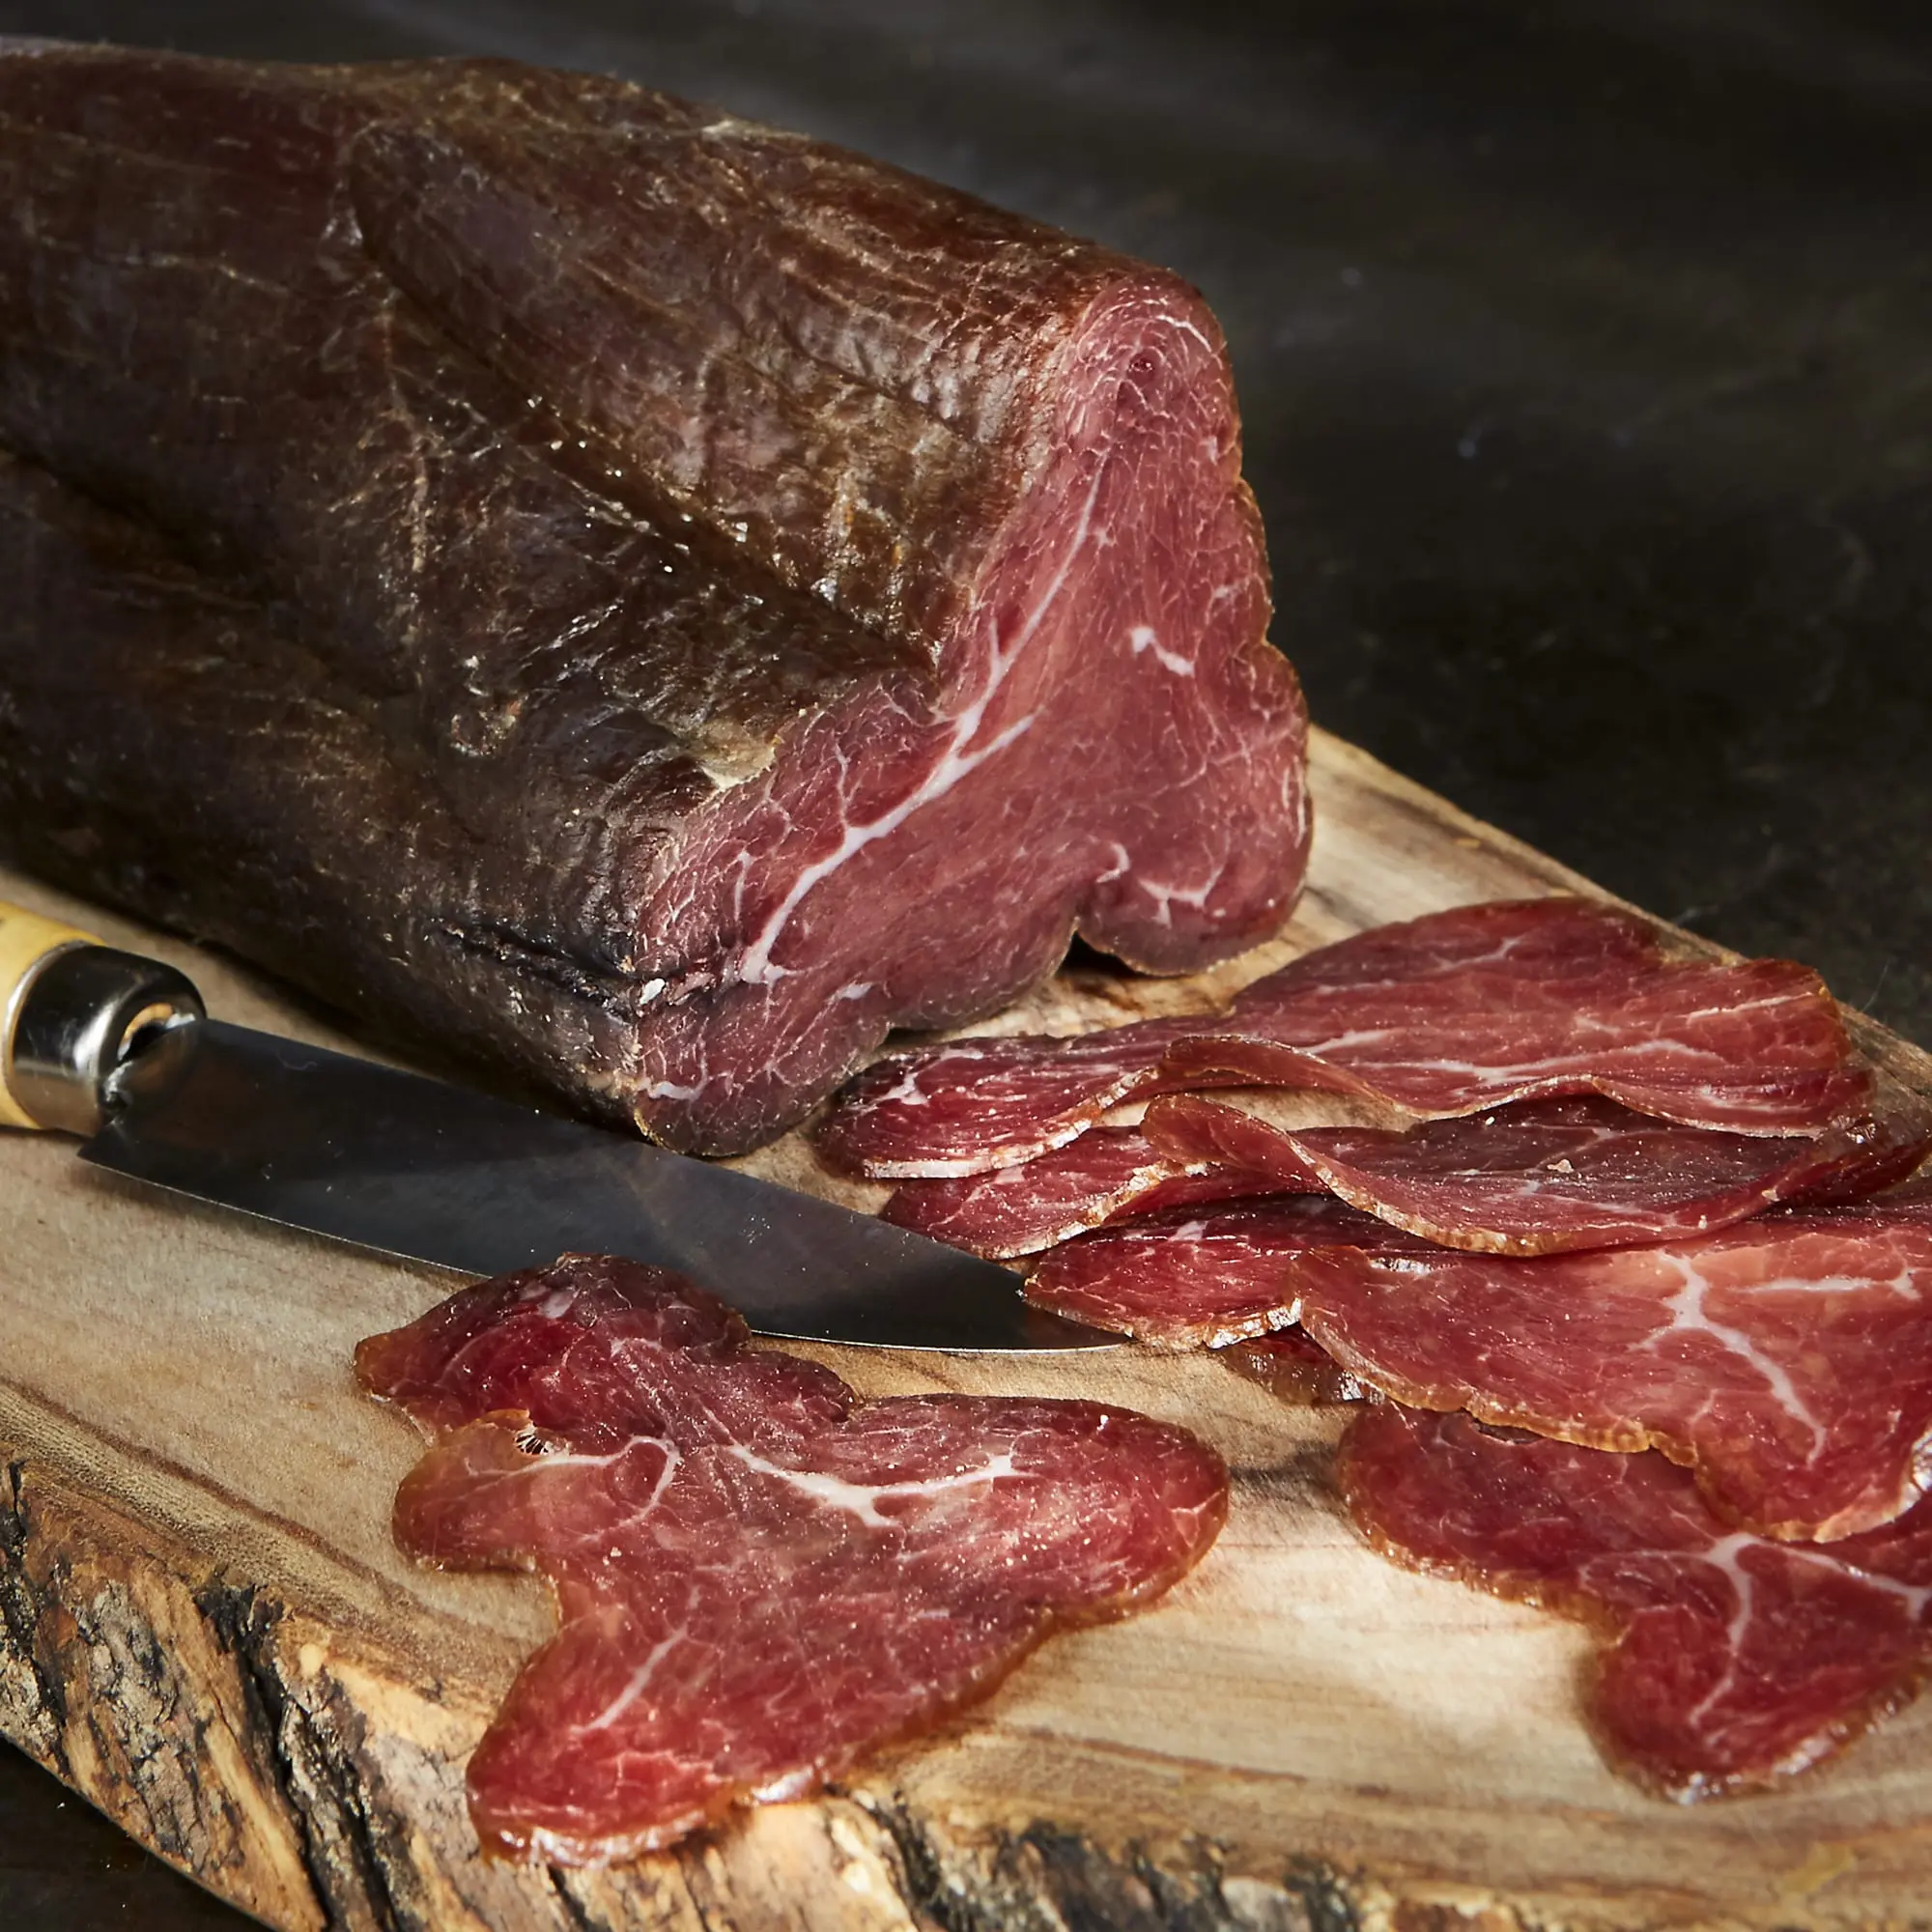 cured smoked beef - Is smoked cured meat cooked